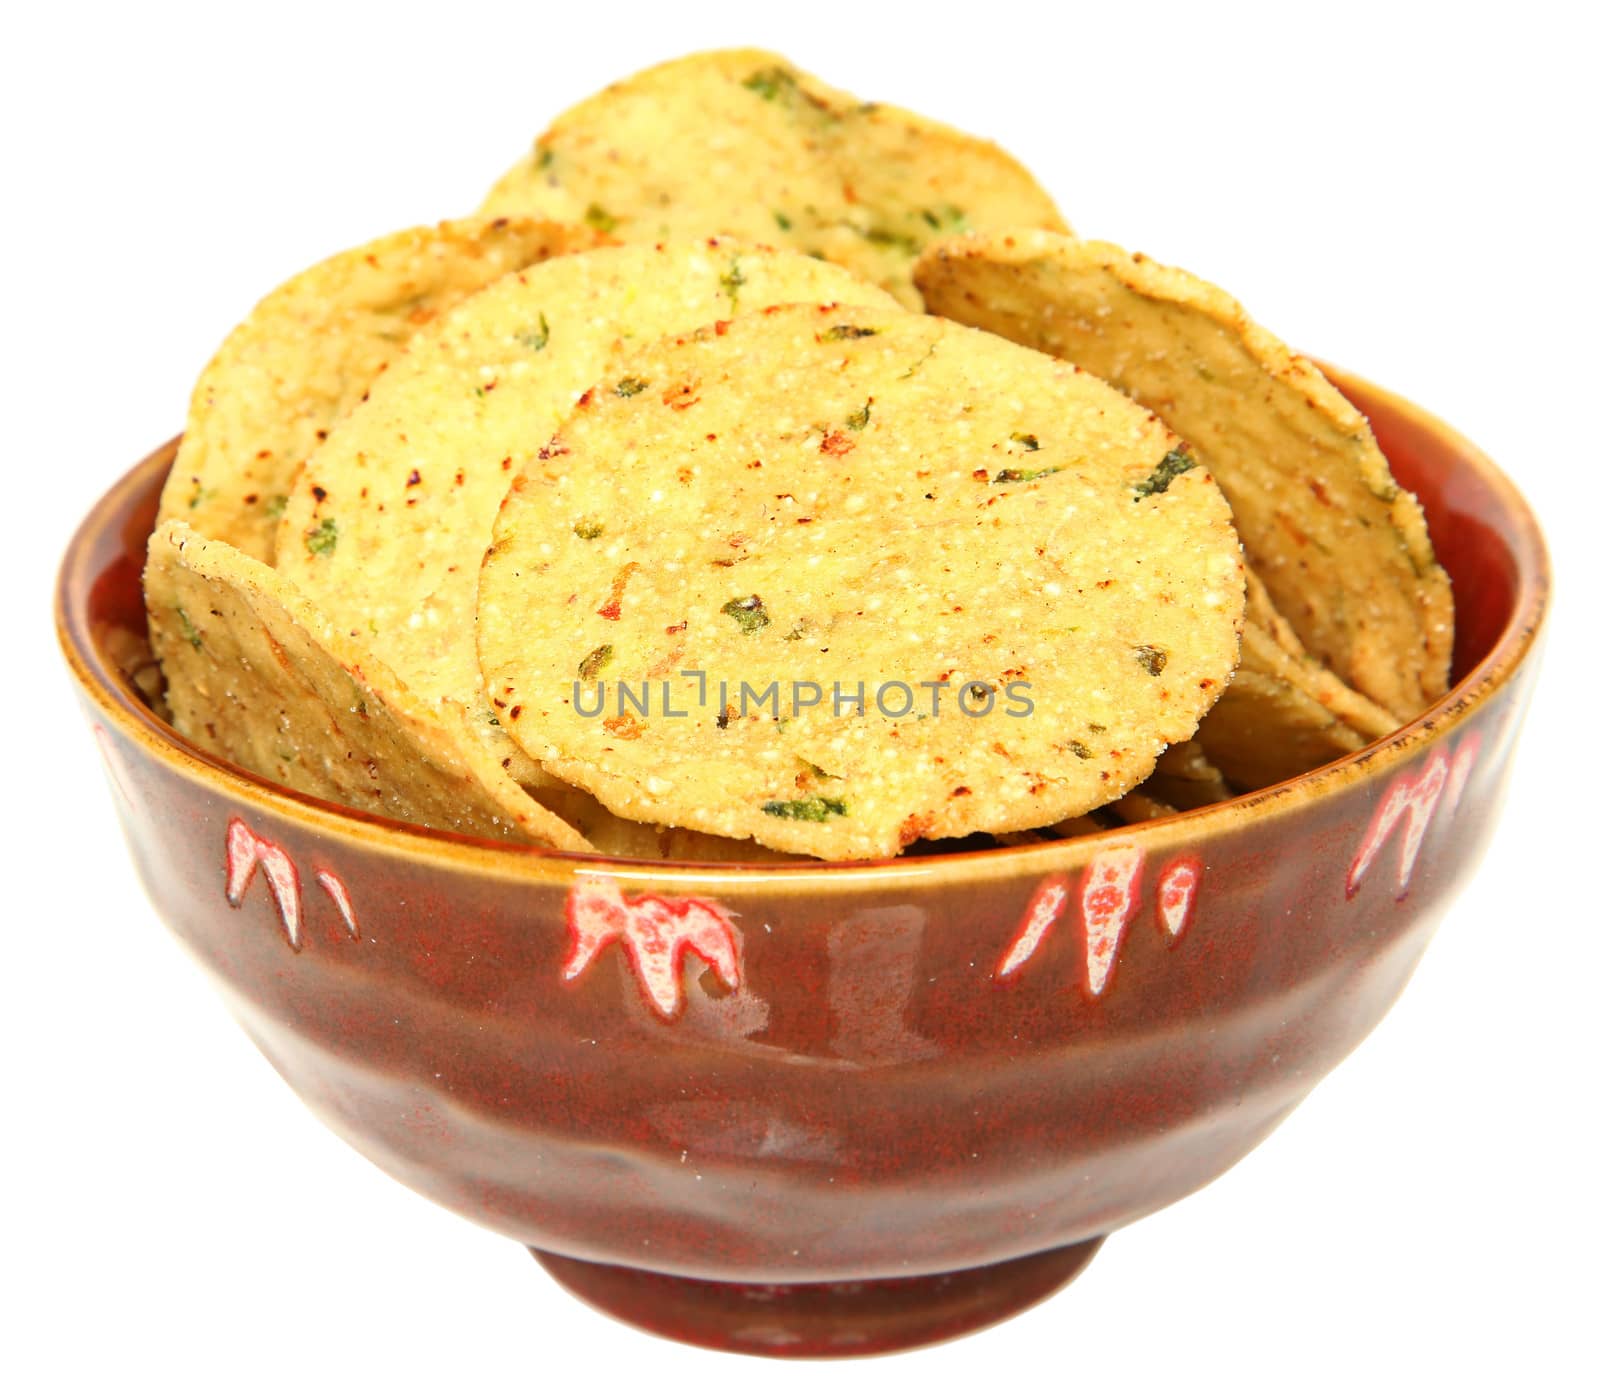 Gluten Free Jalapeno Corn Chips in Bowl Over White by duplass